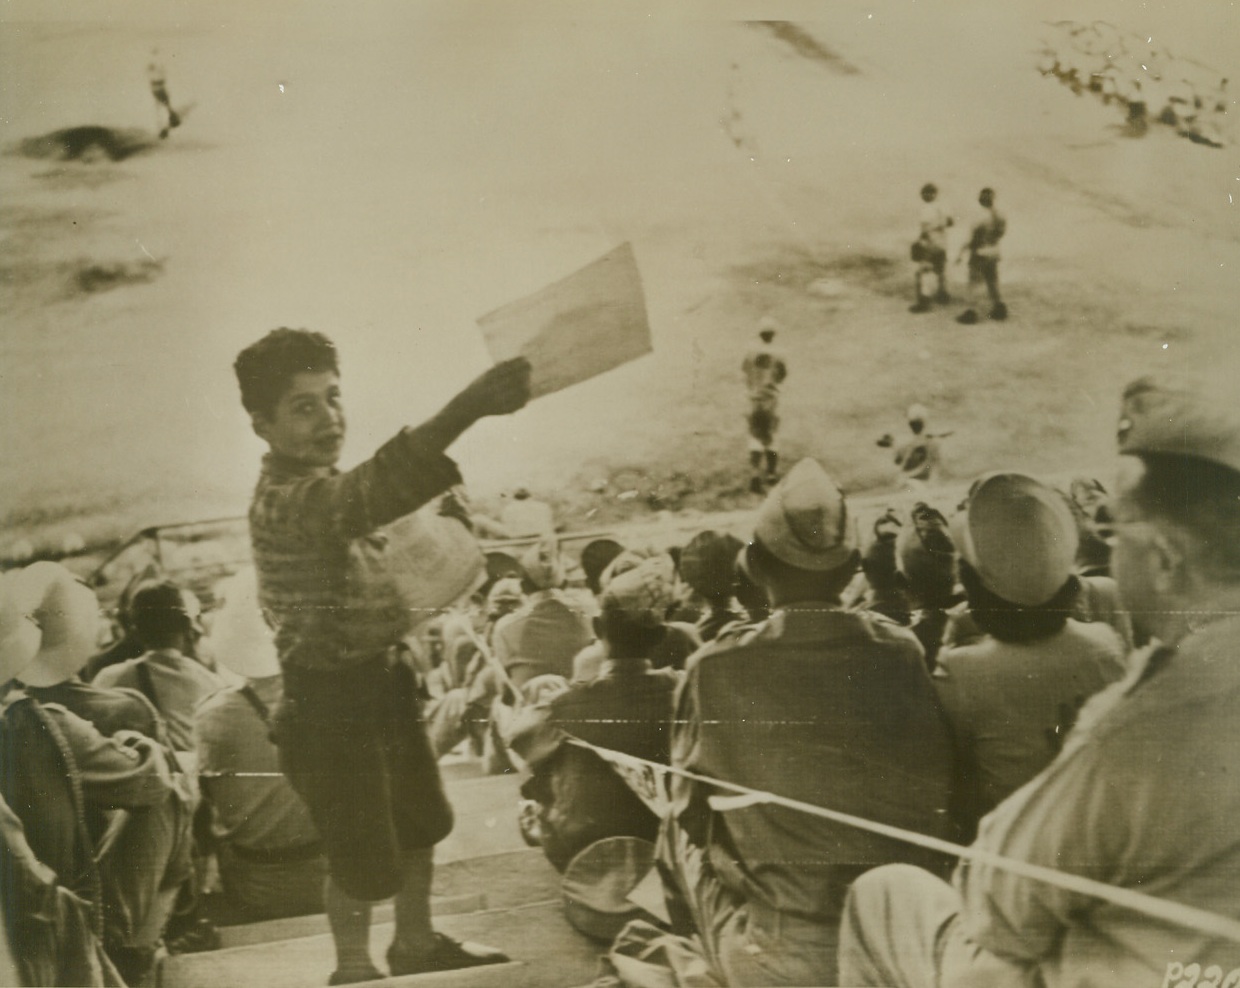 North African “World Series”, 10/4/1943. North Africa – A young Arab lad does a big business selling programs in a packed stadium in North Africa, where the Casablanca “Yankees” took the opening baseball game of the North African “World Series”, from the Algiers M.P.S by a score of 9 to 0.  This picture was flashed to the U.S. by radio telephoto today. Credit line (ACME photo for the war picture pool by Bert Brandt via U.S. Signal Corps);